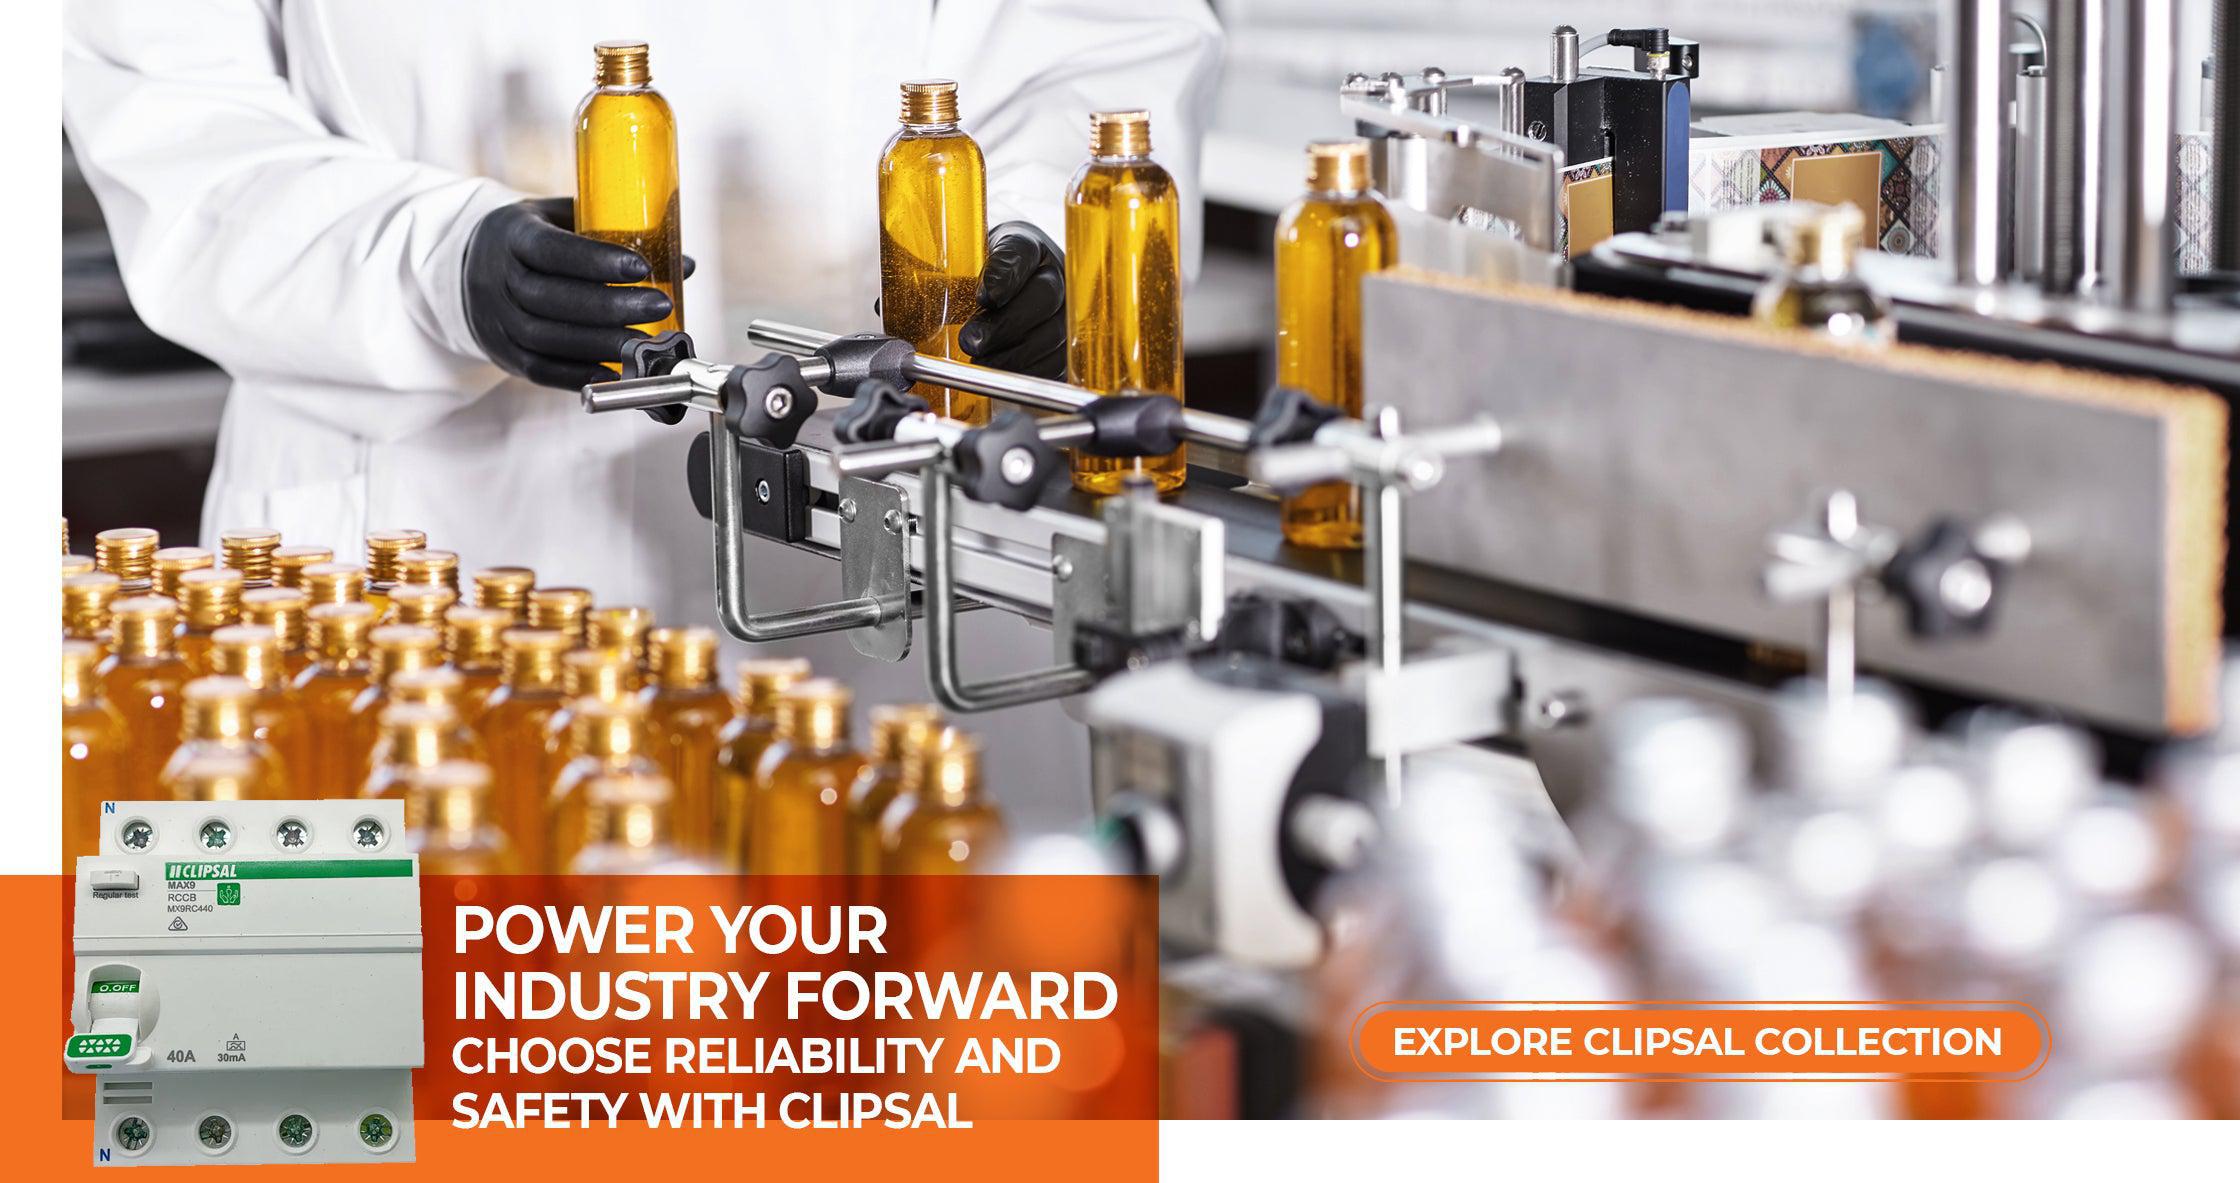 Quality control in the pharmaceutical industry with automated bottling line secured by Clipsal circuit protection for safety and reliability.